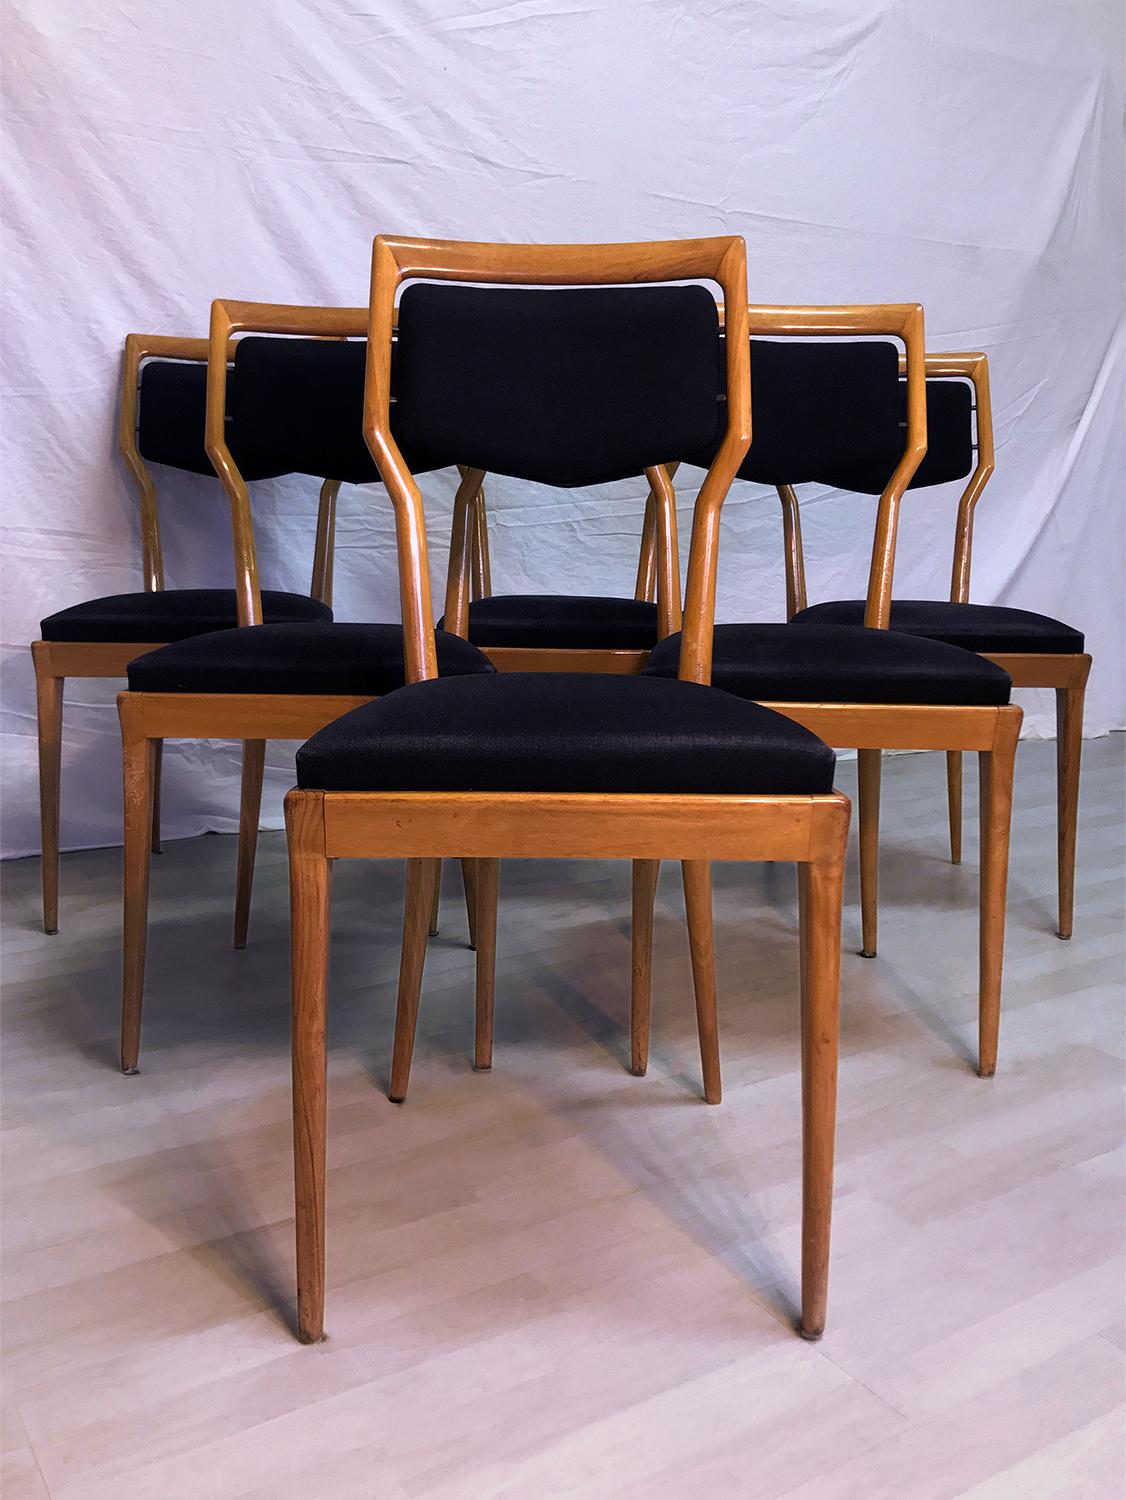 Elegant lines and solid structures for this stunning set of six dining Chairs designed by Vittorio Dassi in the 1950s.
The wooden surfaces as well the backs and seats, both upholstered in black fabric, with their paddings are in very good conditions